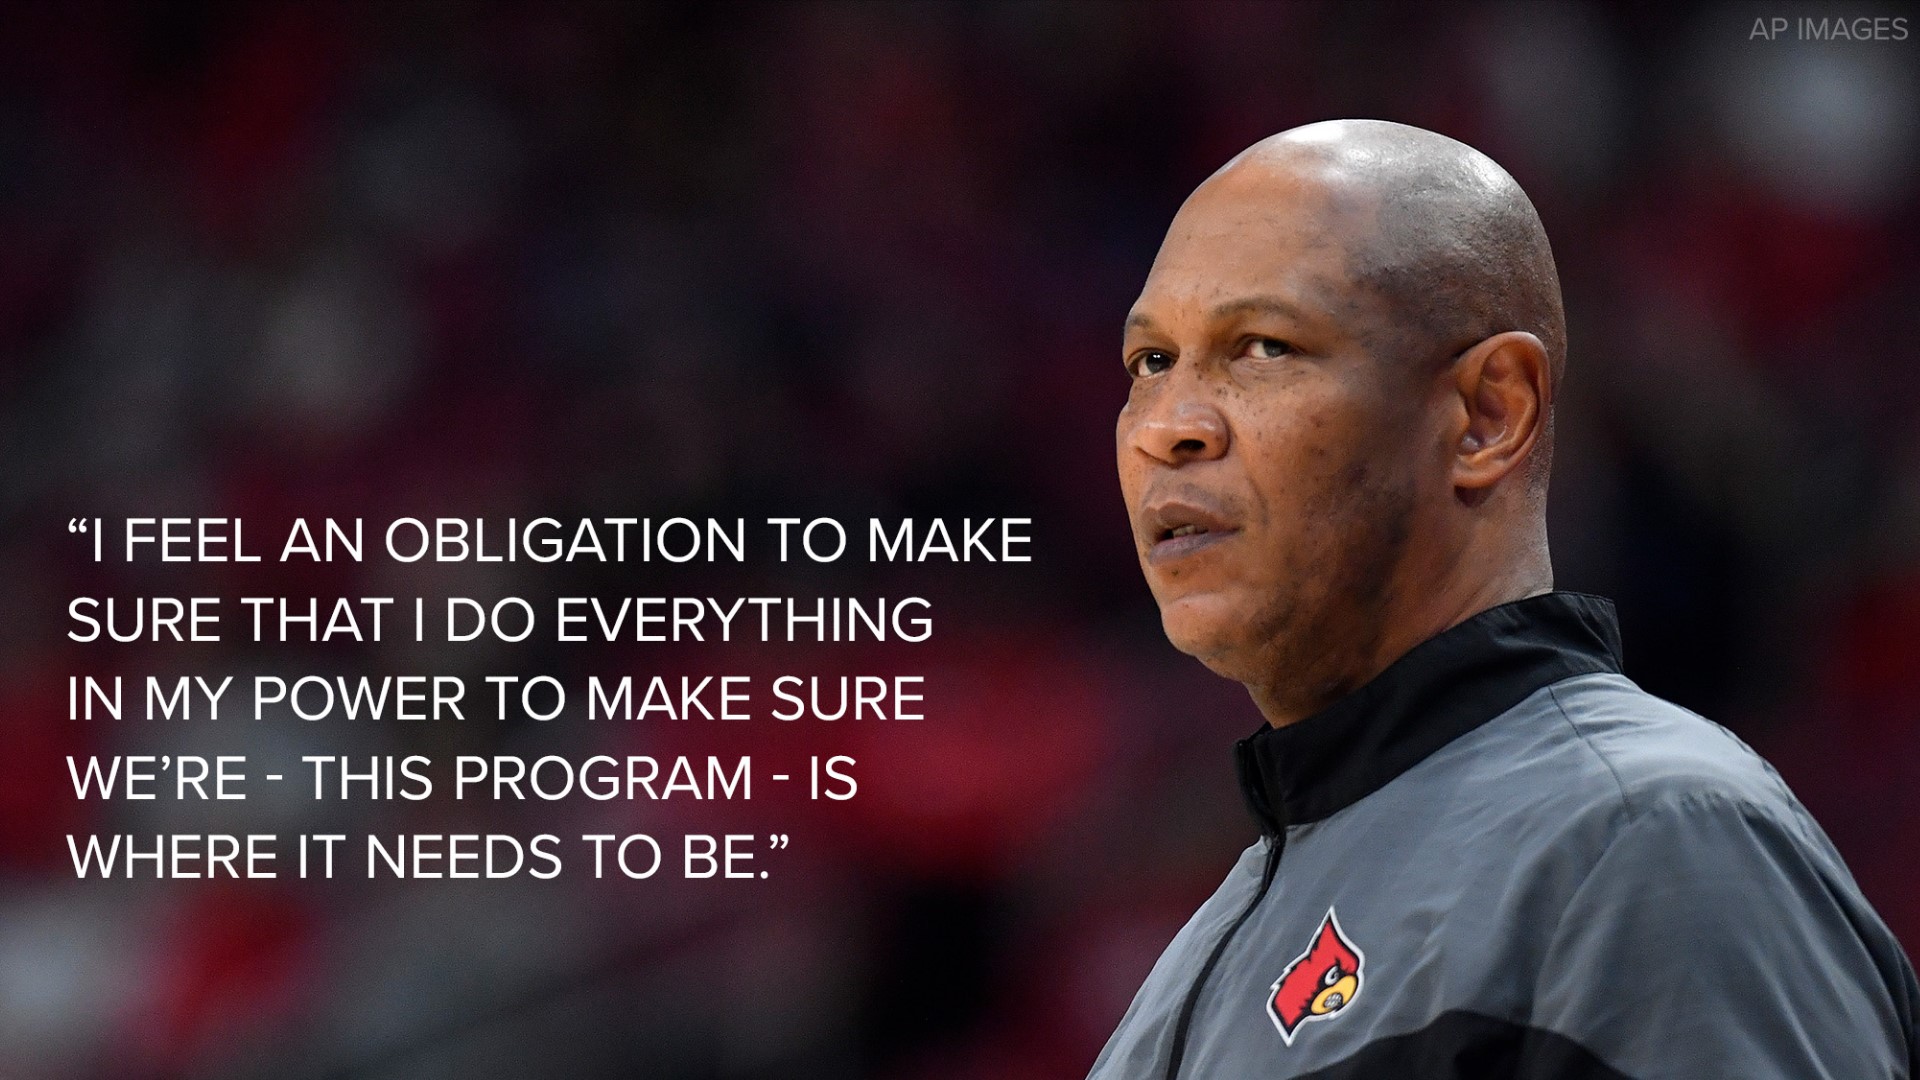 University of Louisville men's basketball head coach Kenny Payne talked about how hard the season has been and his thoughts on the North Carolina game.